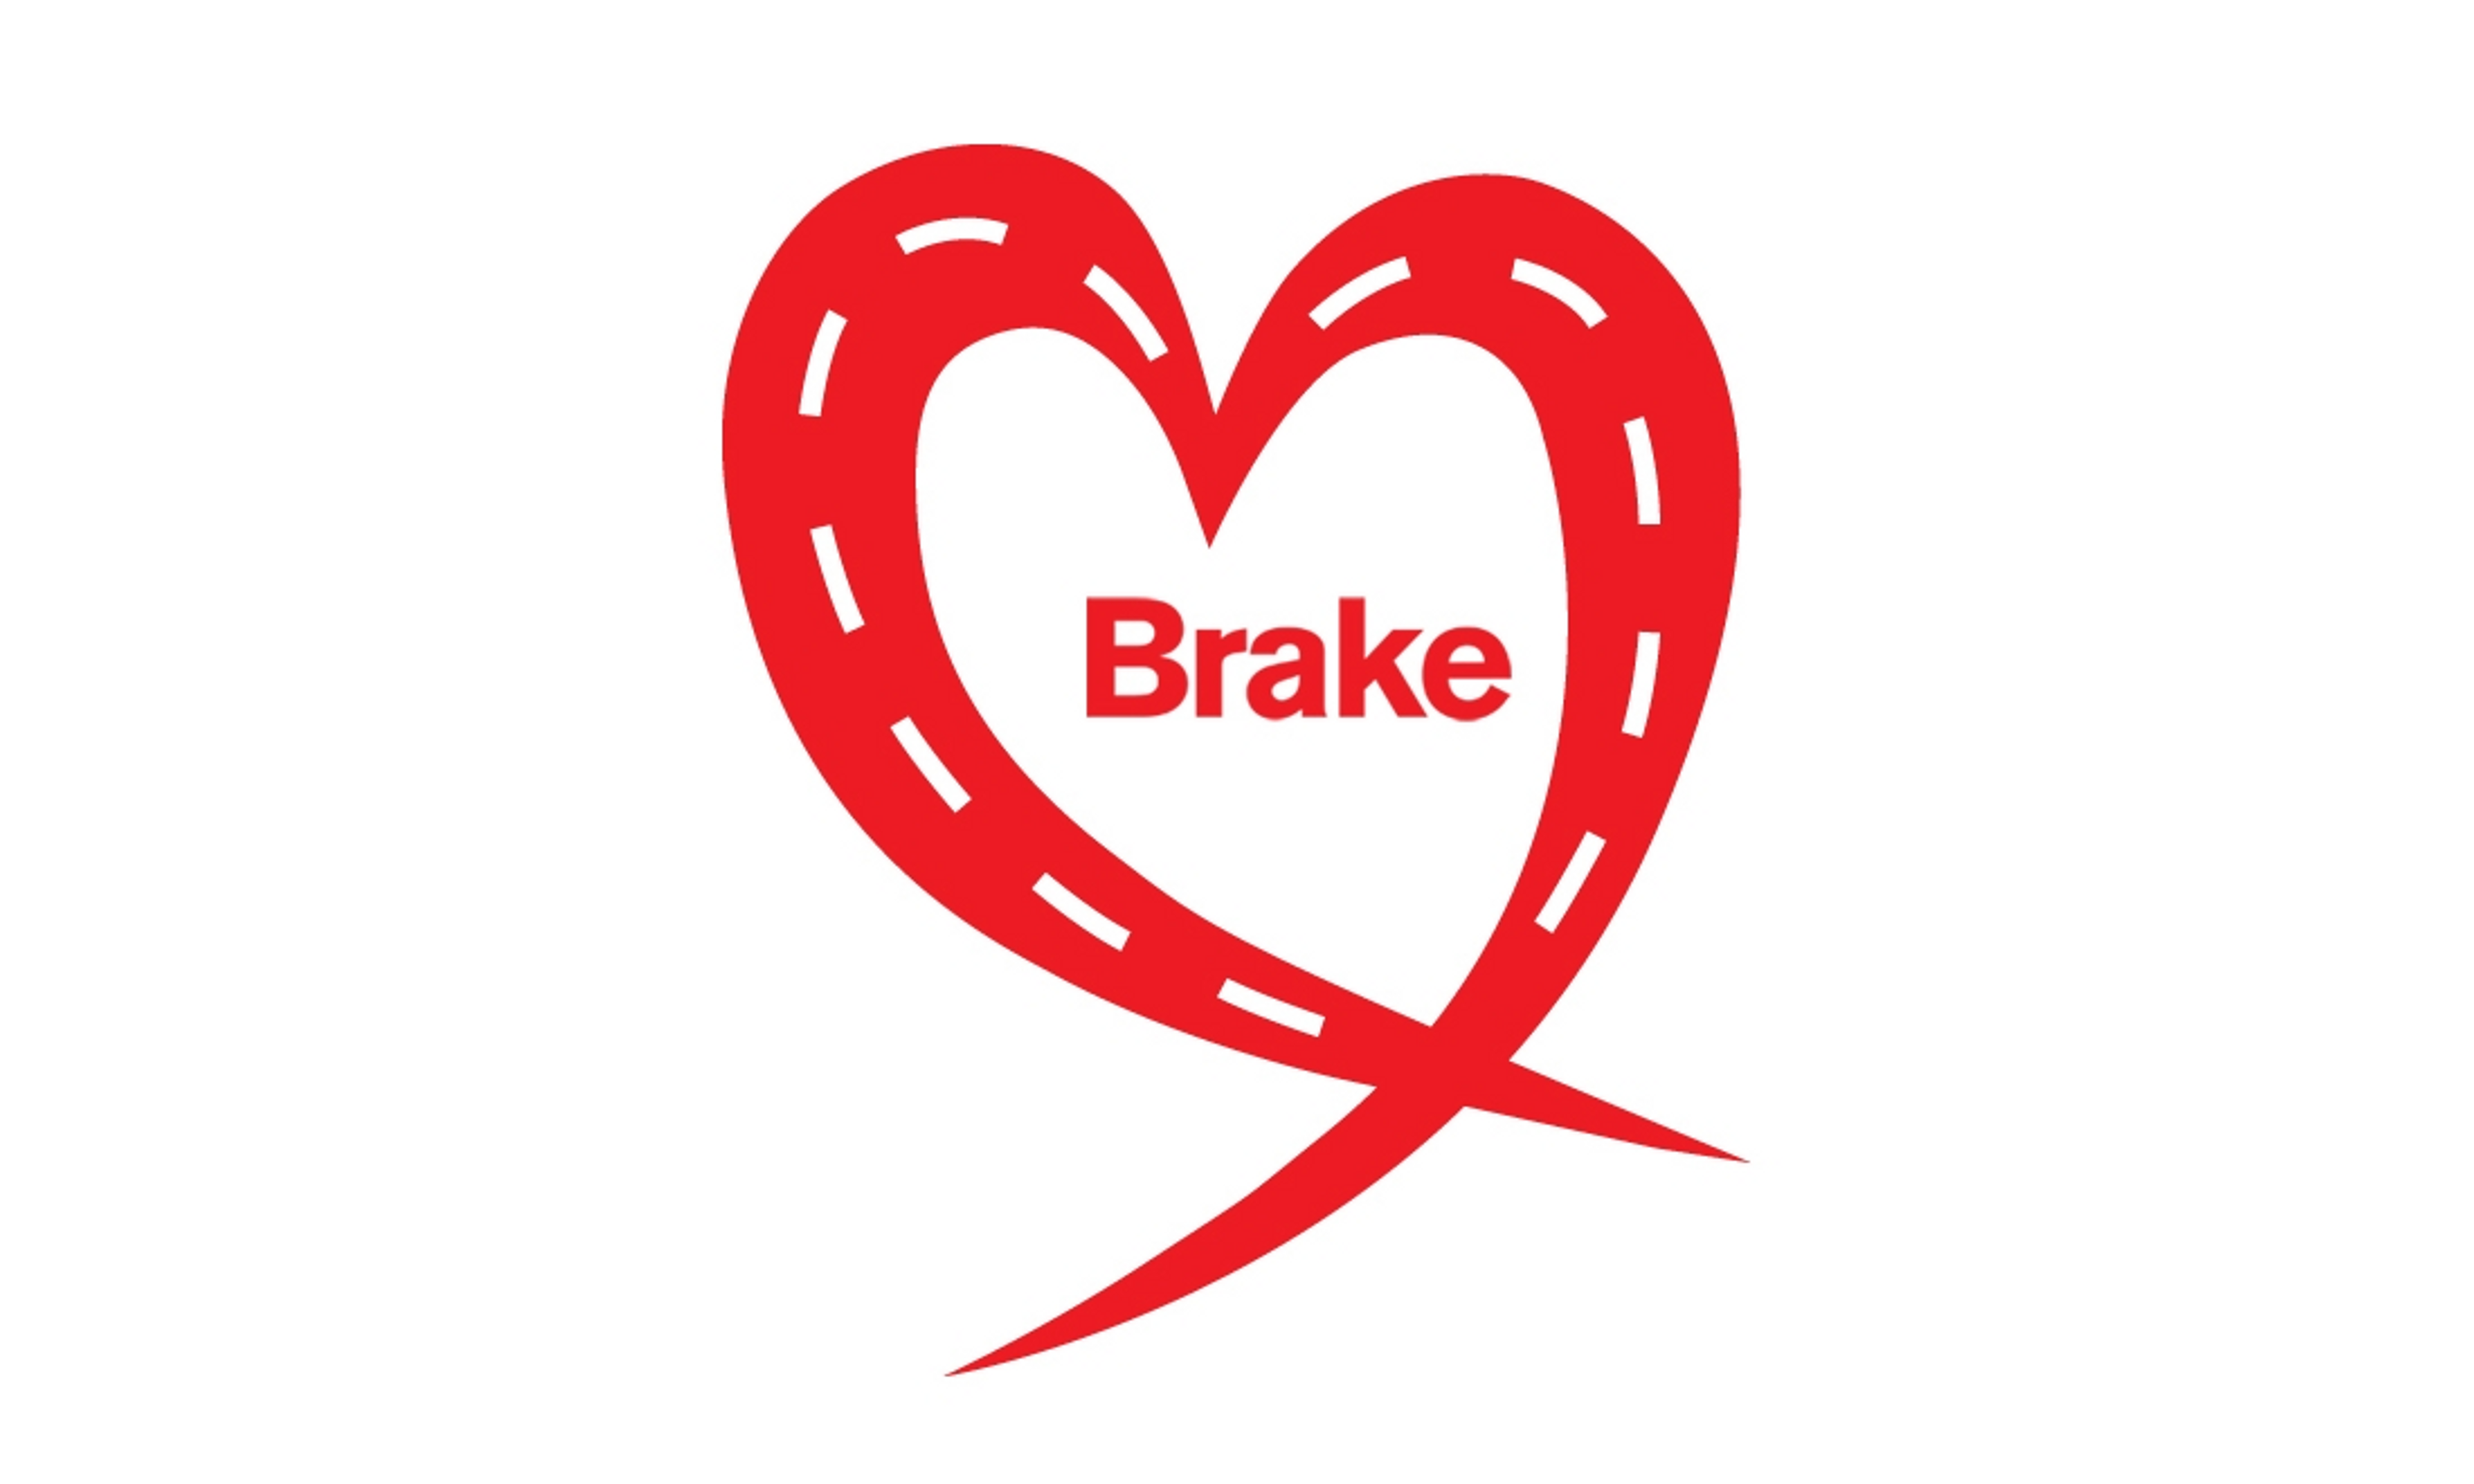 Zego partners with road safety charity Brake to promote safer driving amongst fleets